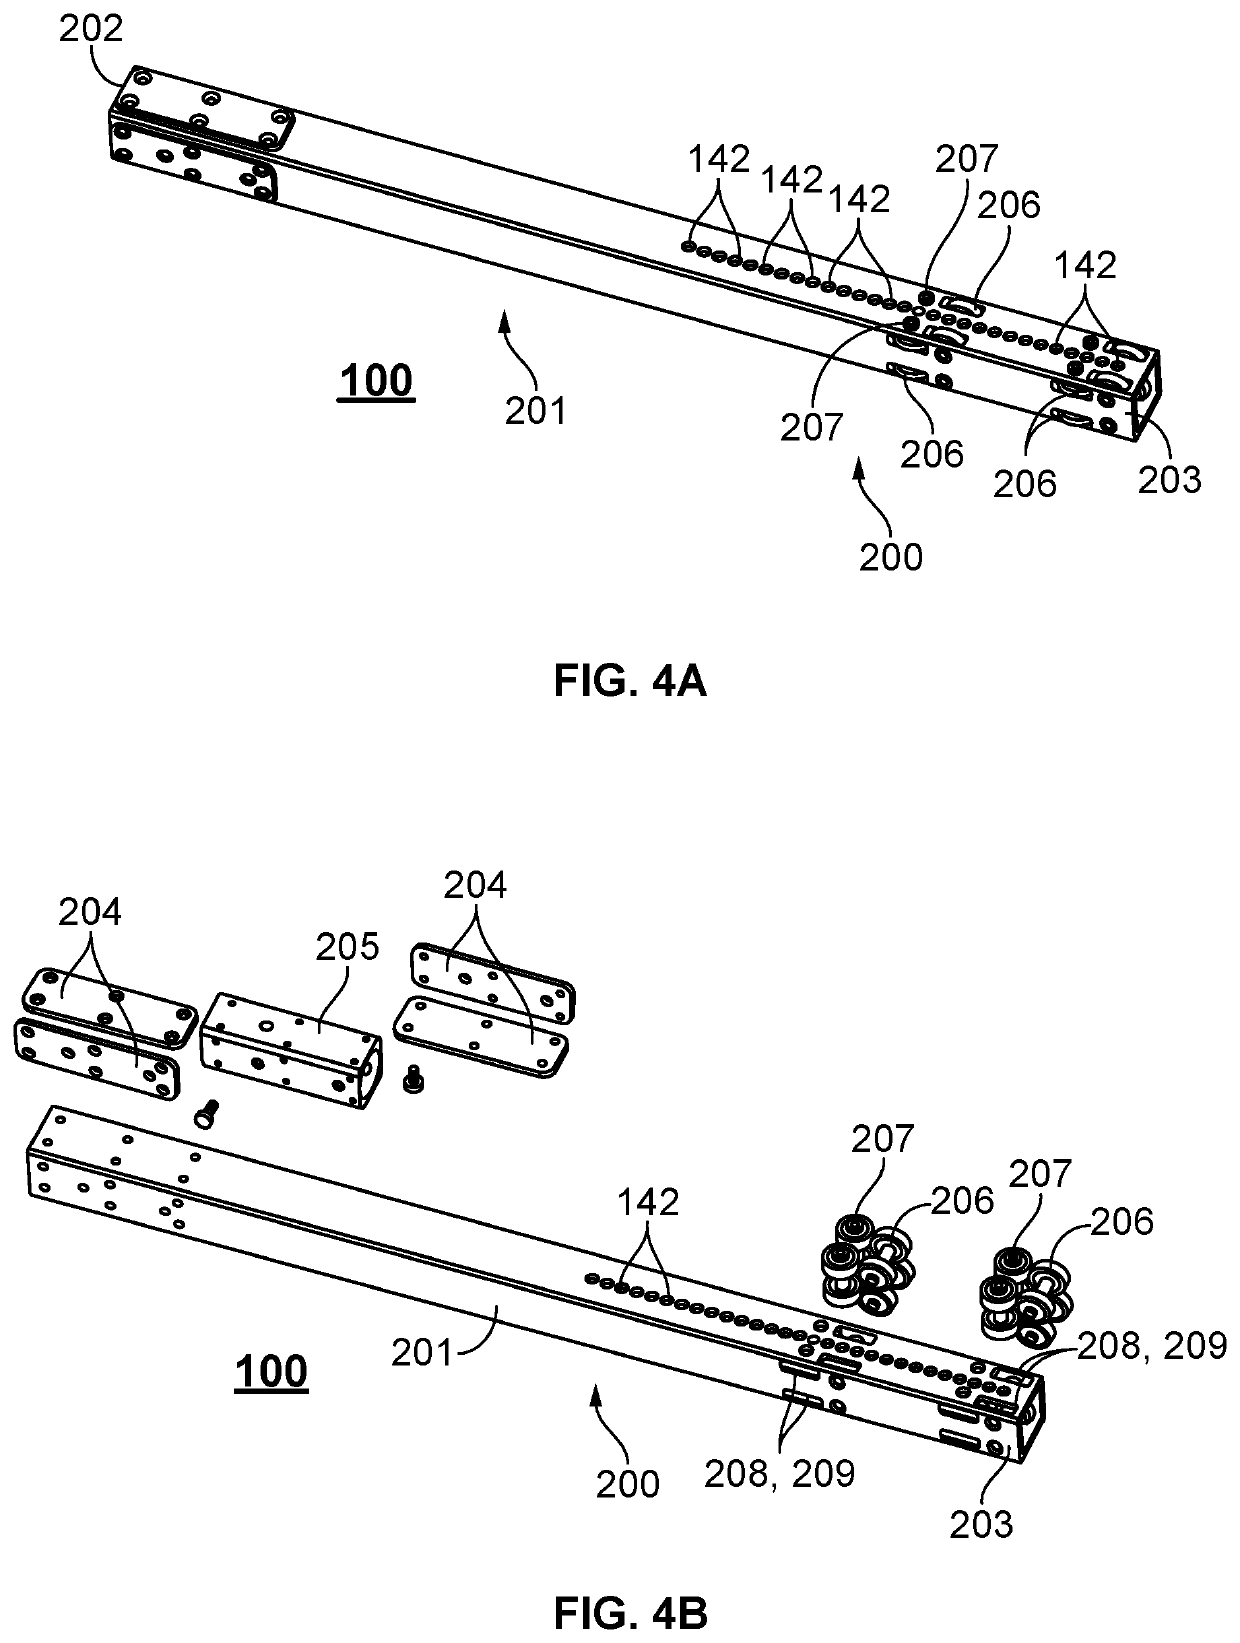 Surgical positioner apparatus, system, and method for securing to a side rail of support table